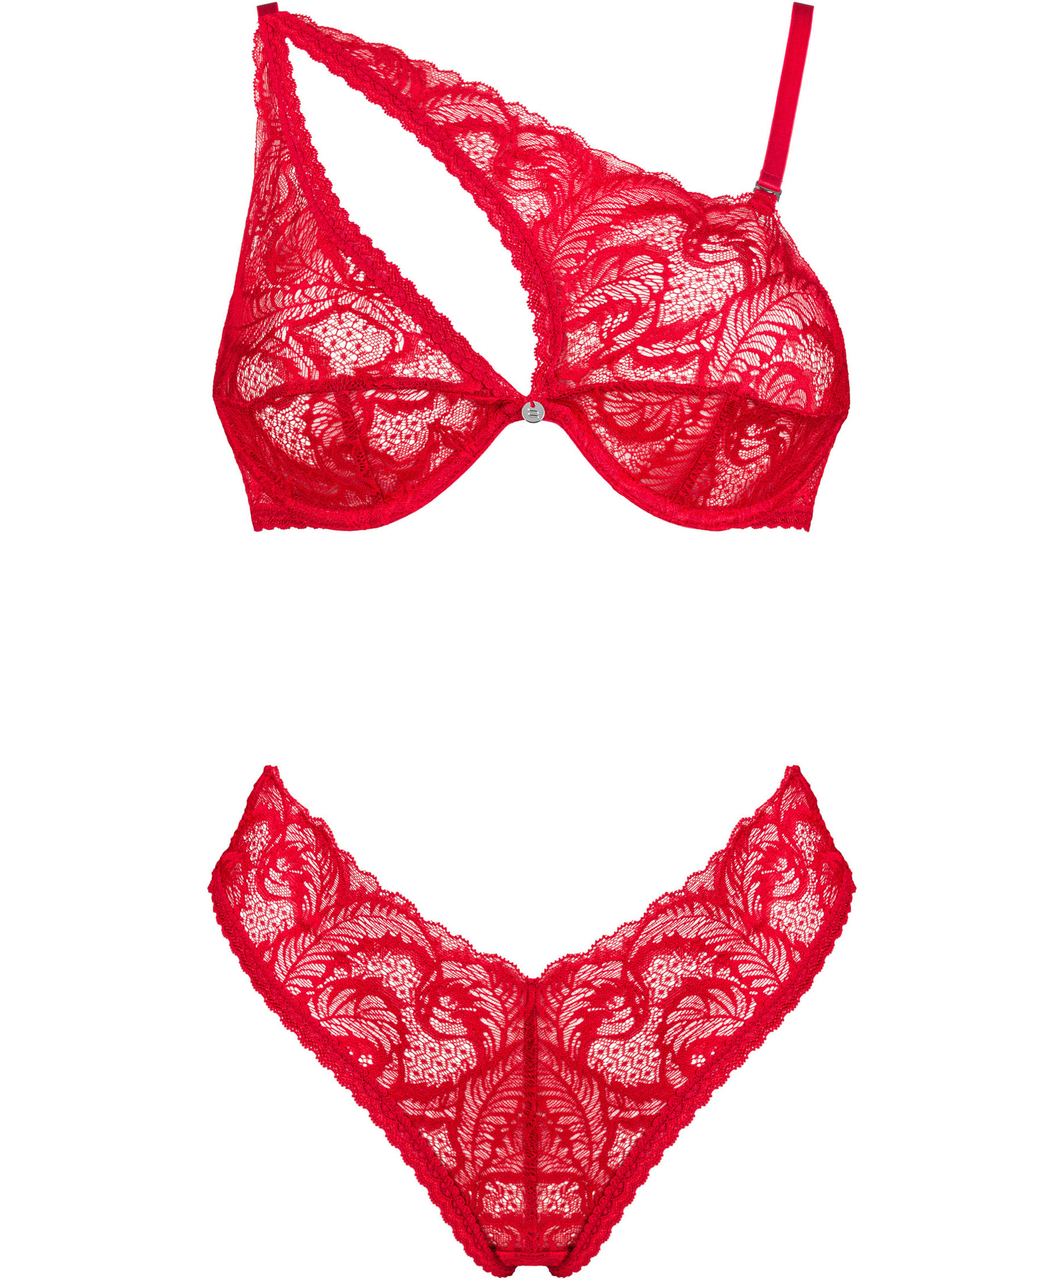 Obsessive Atenica red lace lingerie set